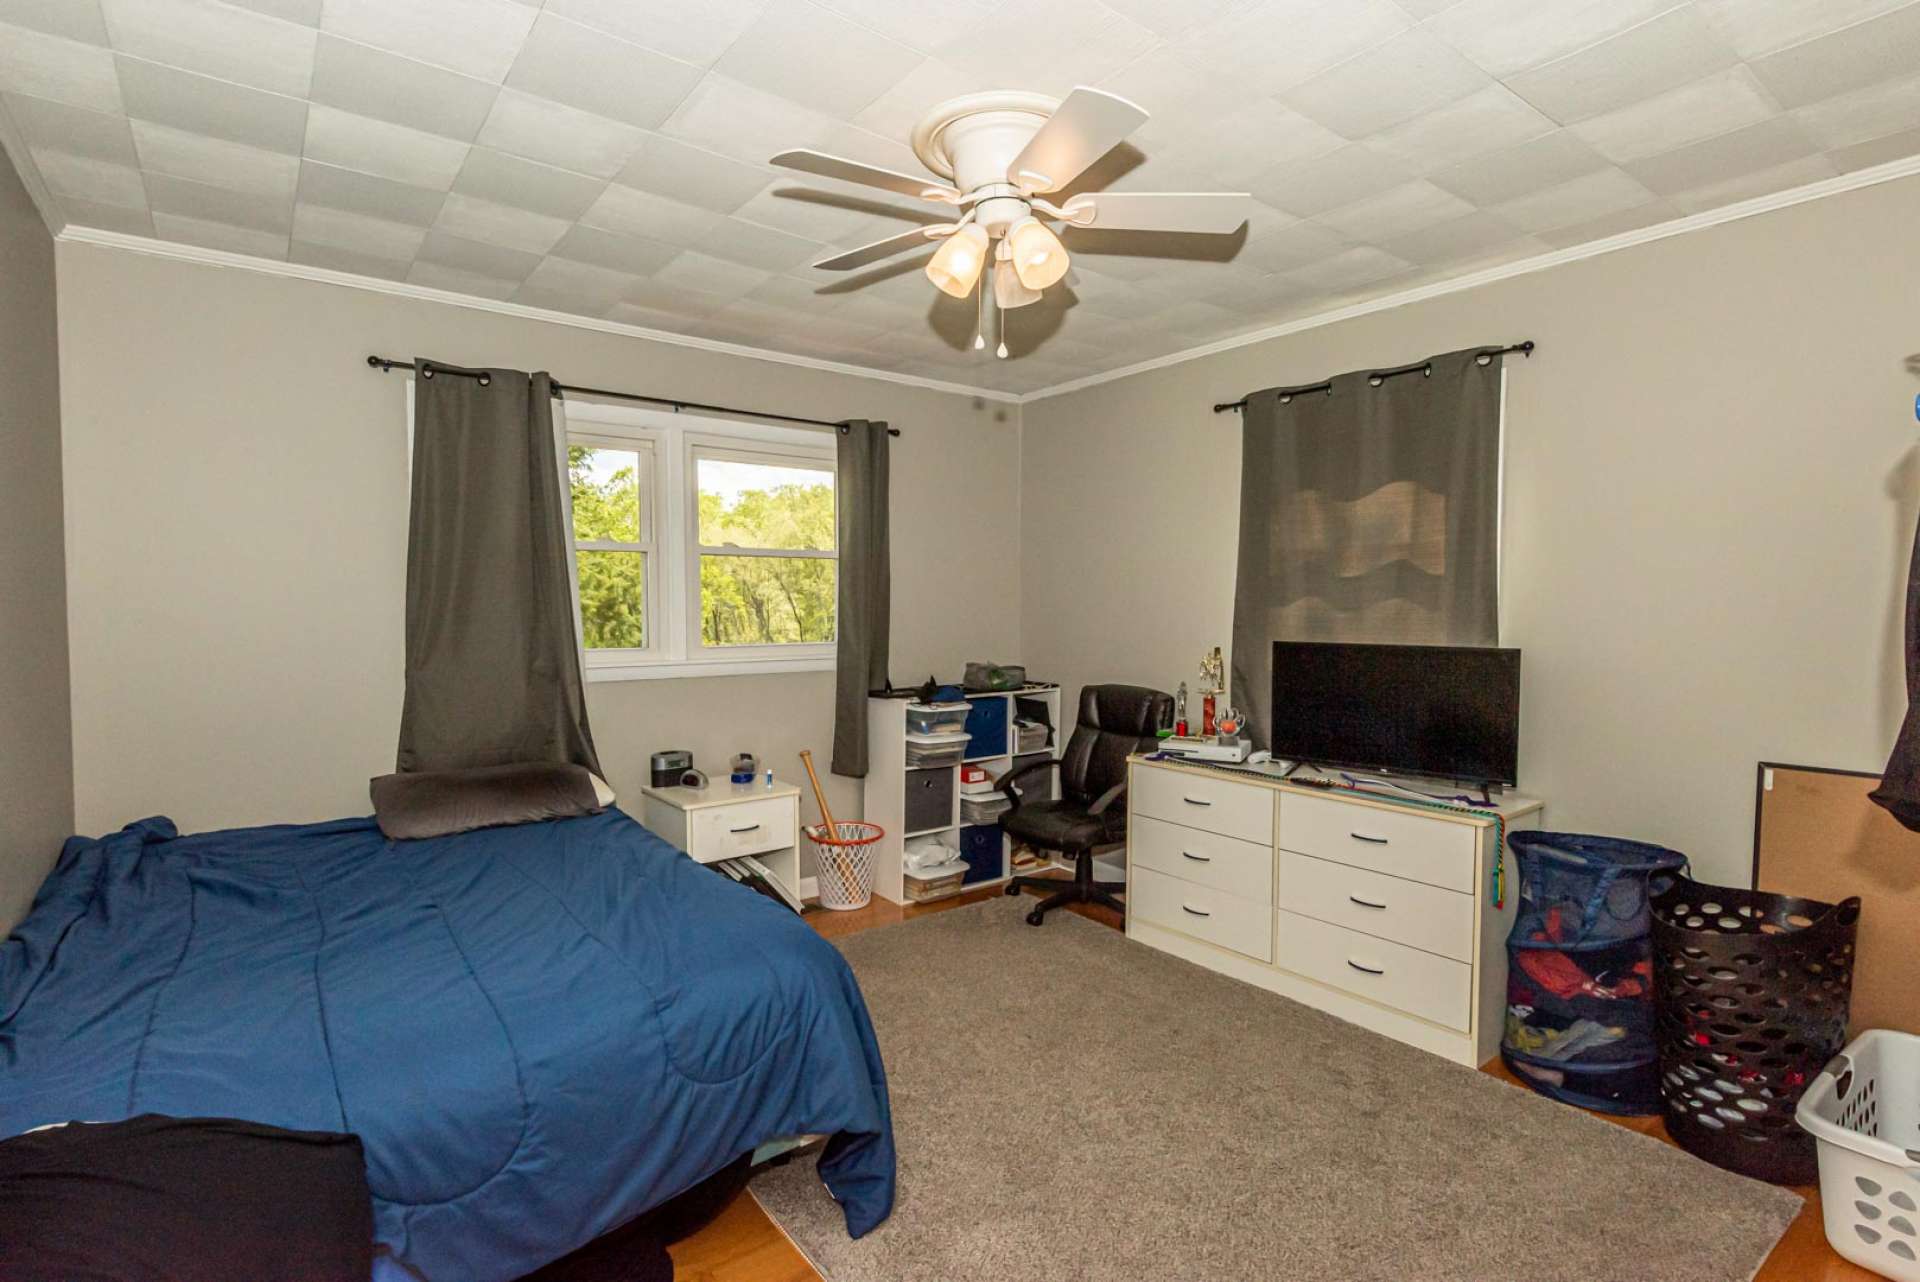 There are two nicely sized guest bedrooms, both with hardwood floors.